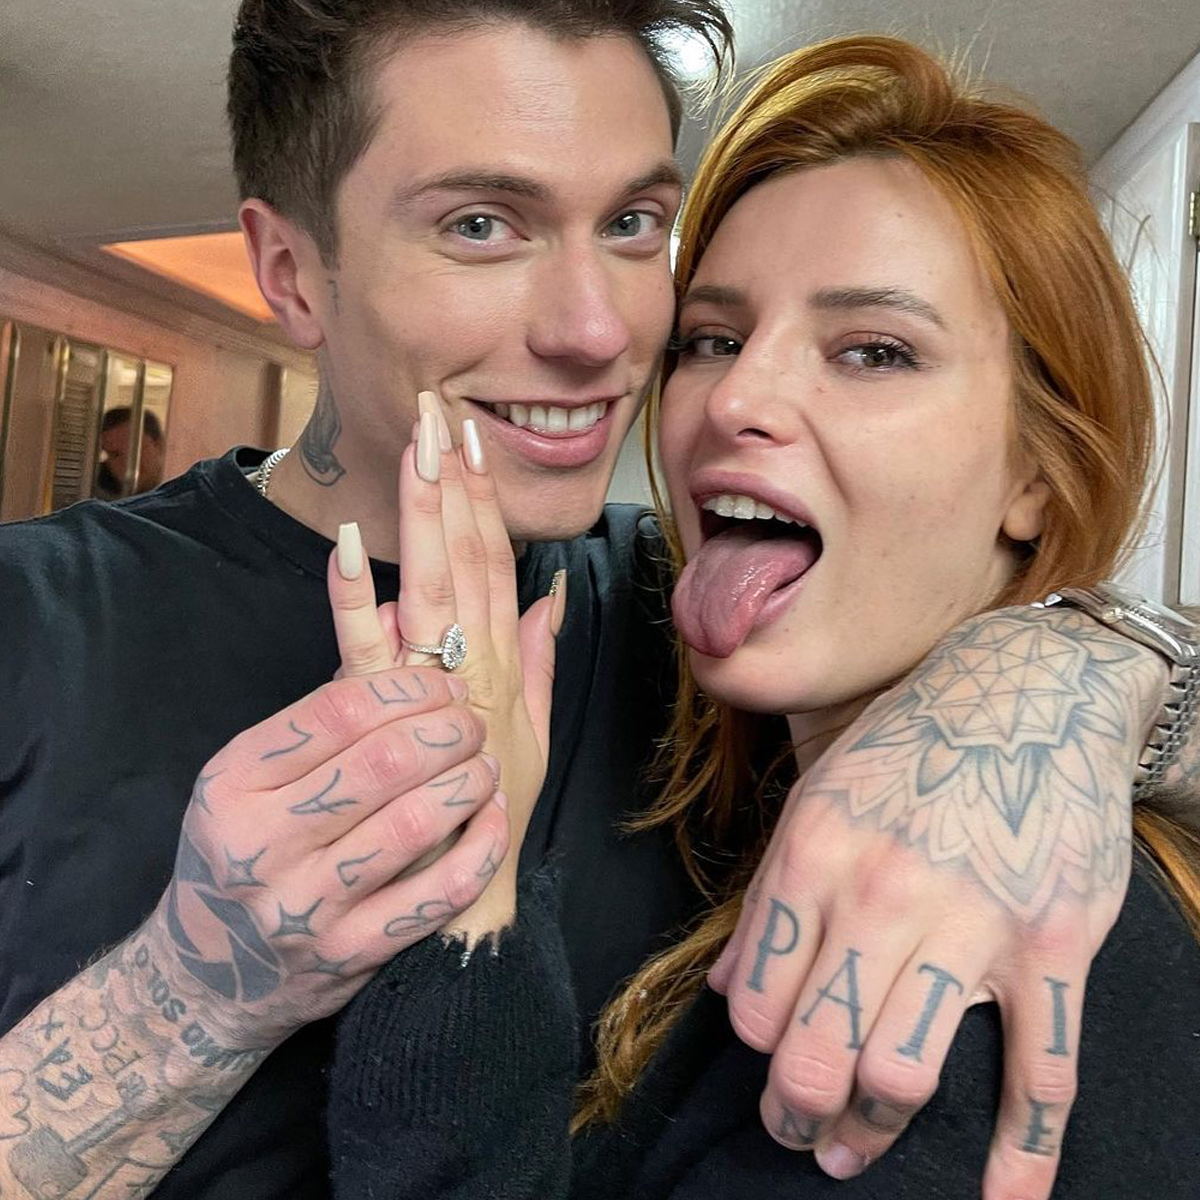 Bella Thorne Lesbian Porn - Bella Thorne News, Pictures, and Videos - E! Online